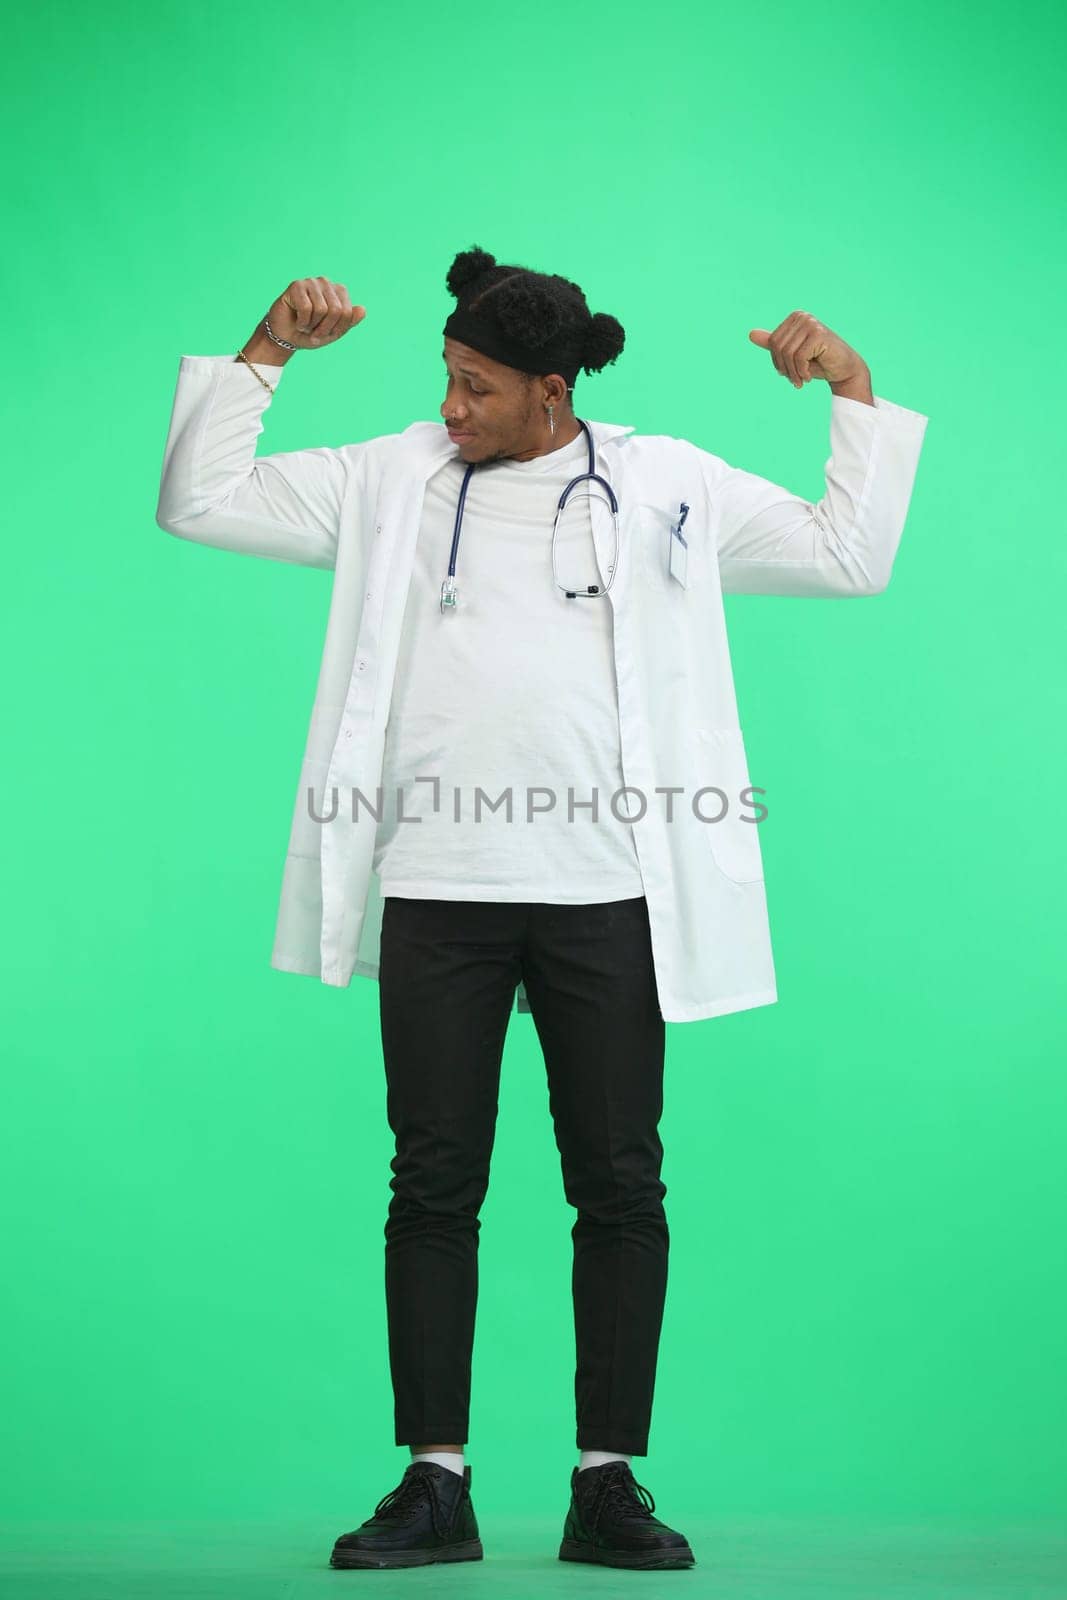 The doctor, in full height, on a green background, shows strength by Prosto